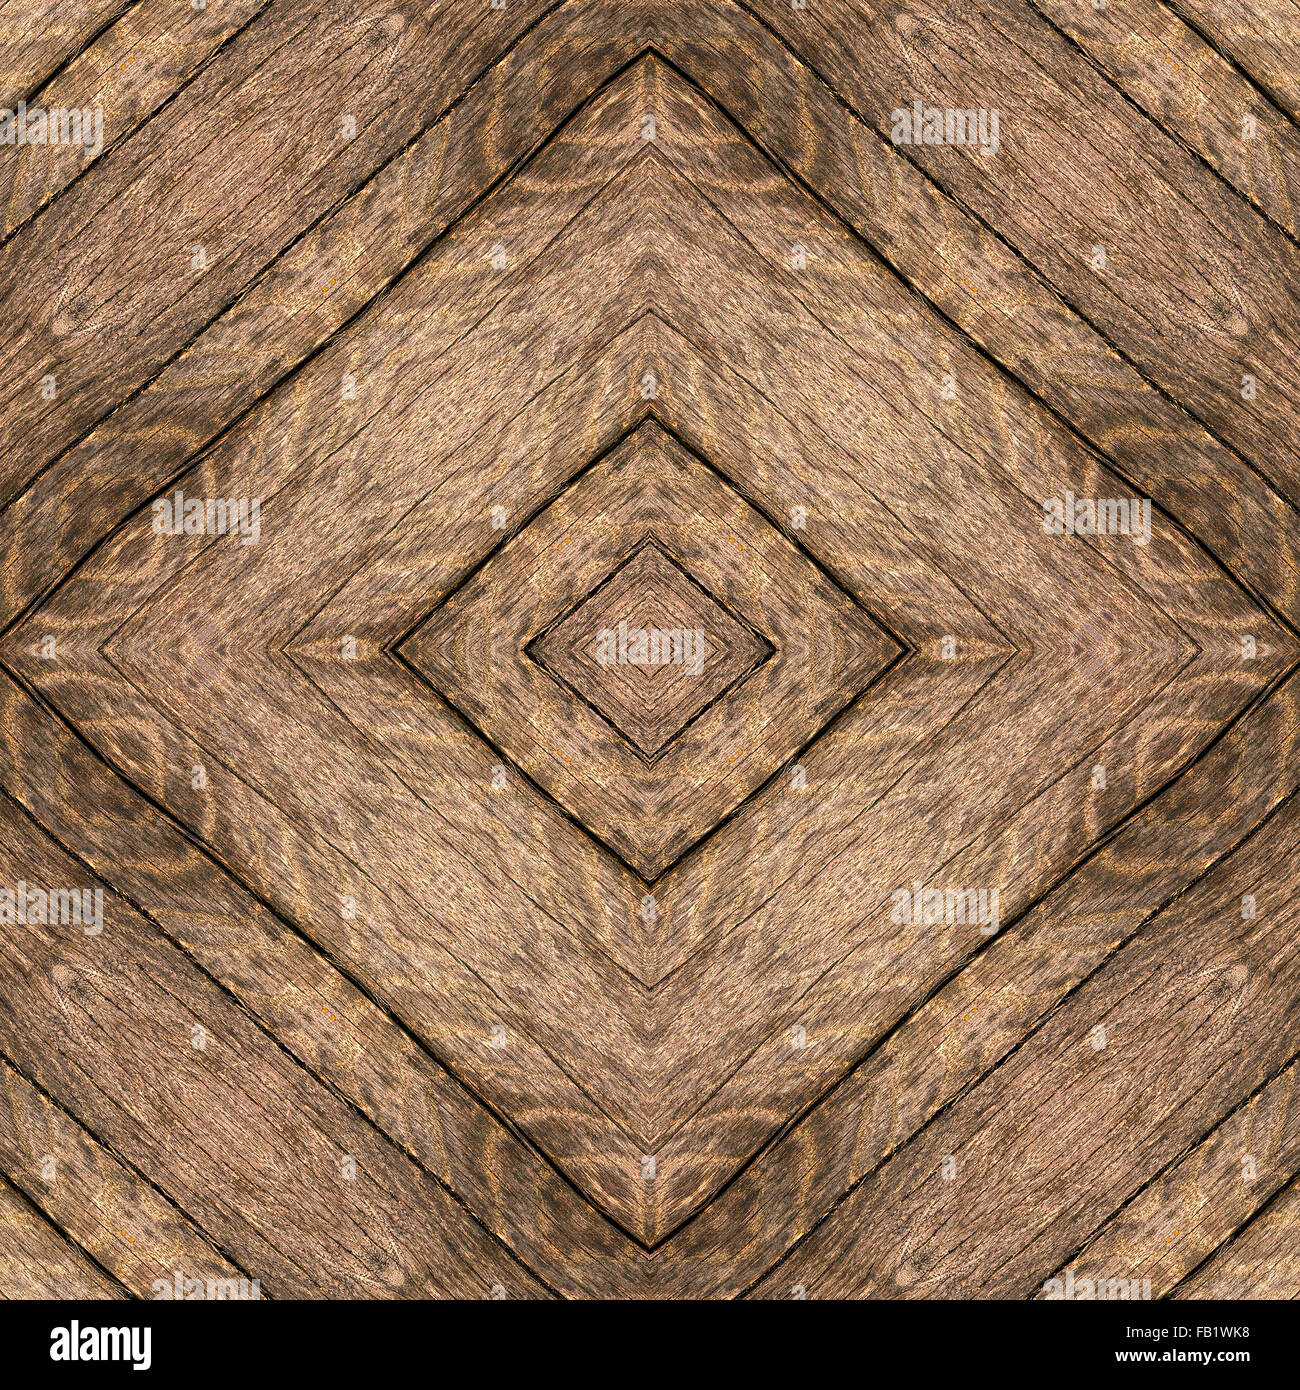 Old wood seamless texture or background. Stock Photo